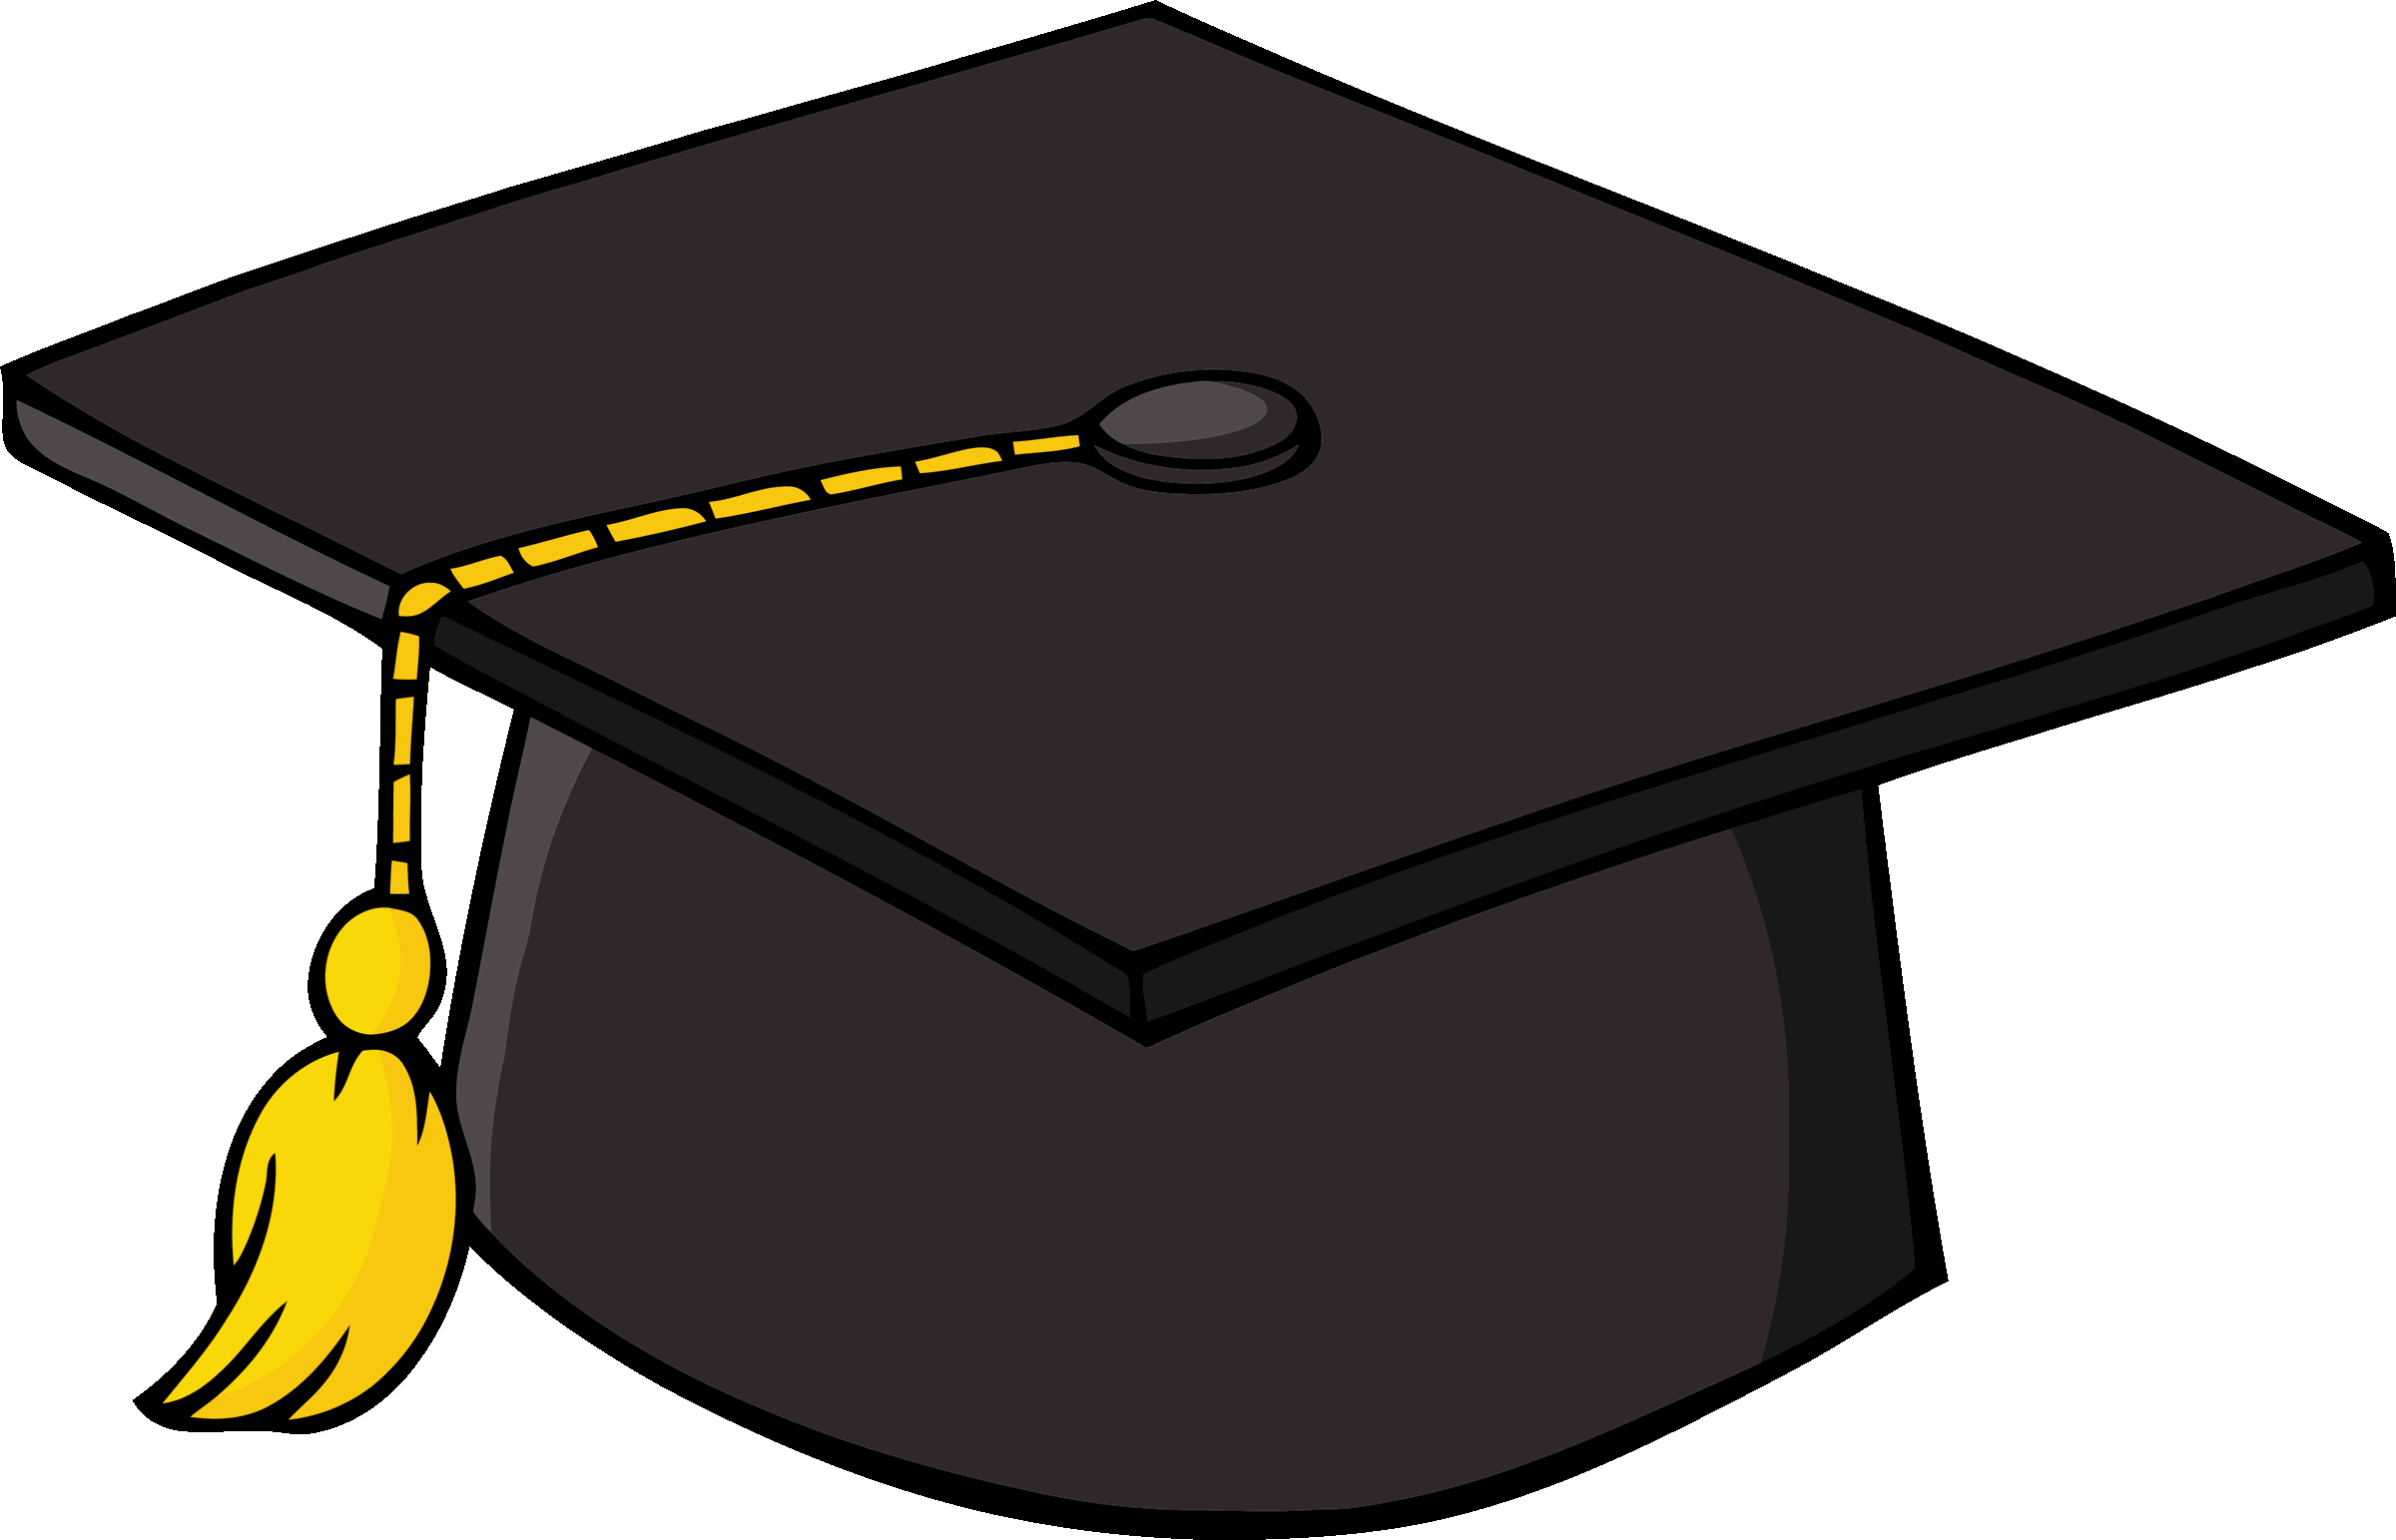 Images For > Graduation Cap And Diploma Clipart Black And White